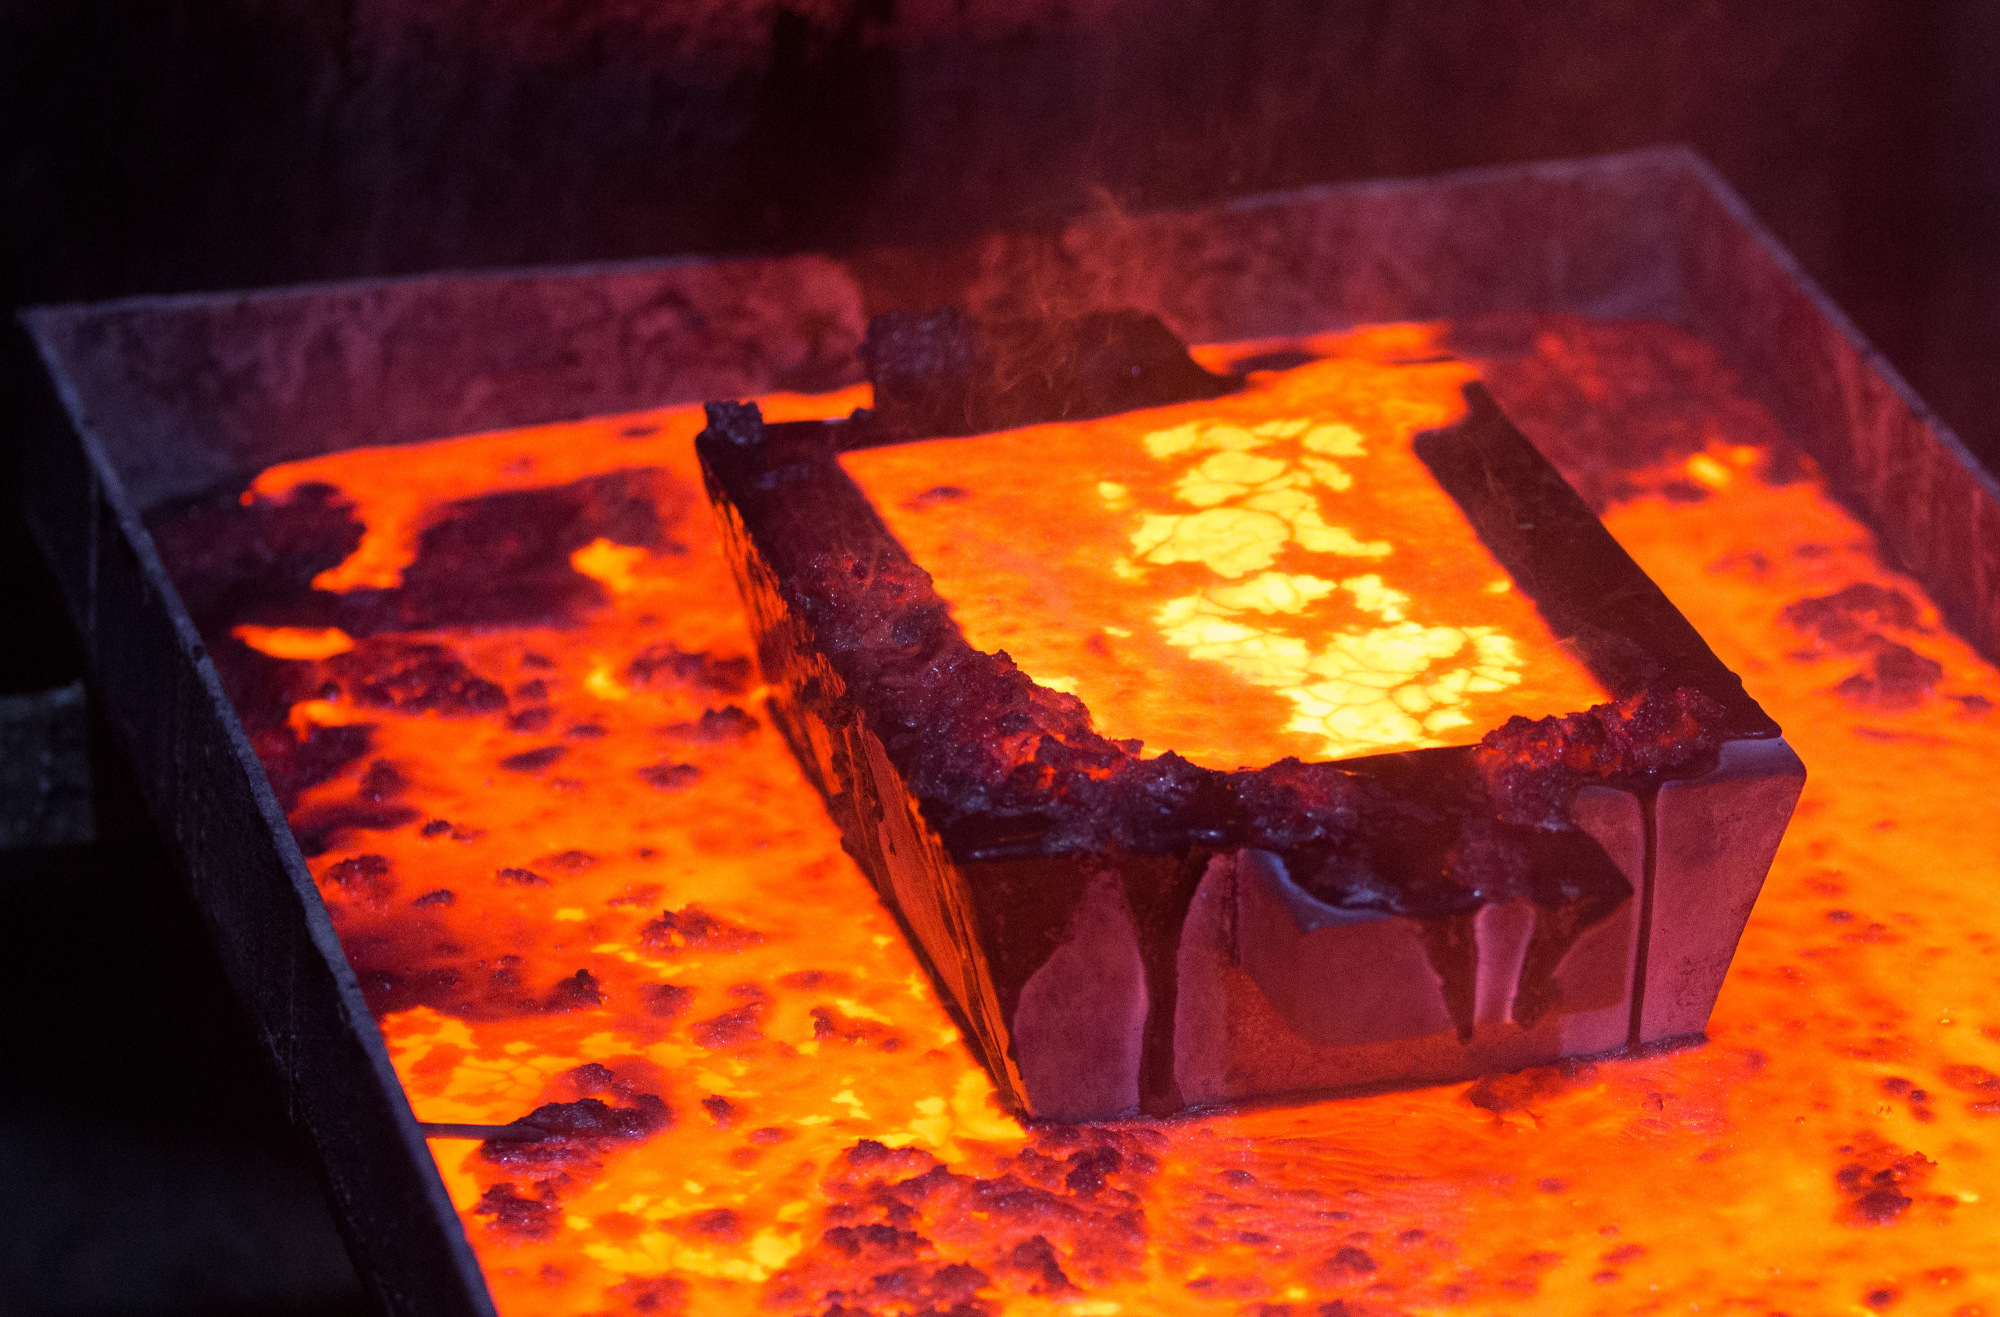 A casting mold filled with molten gold sits above a melting vat during the manufacture of gold ingots at the Suzdal gold mine, operated by Nordgold NV, in Semey, Kazakhstan, on Tuesday, June 7, 2016. Nordgold, which has its stock traded in London in the form of general depository receipts, wants a more advanced listing in the city to better attract international investors.